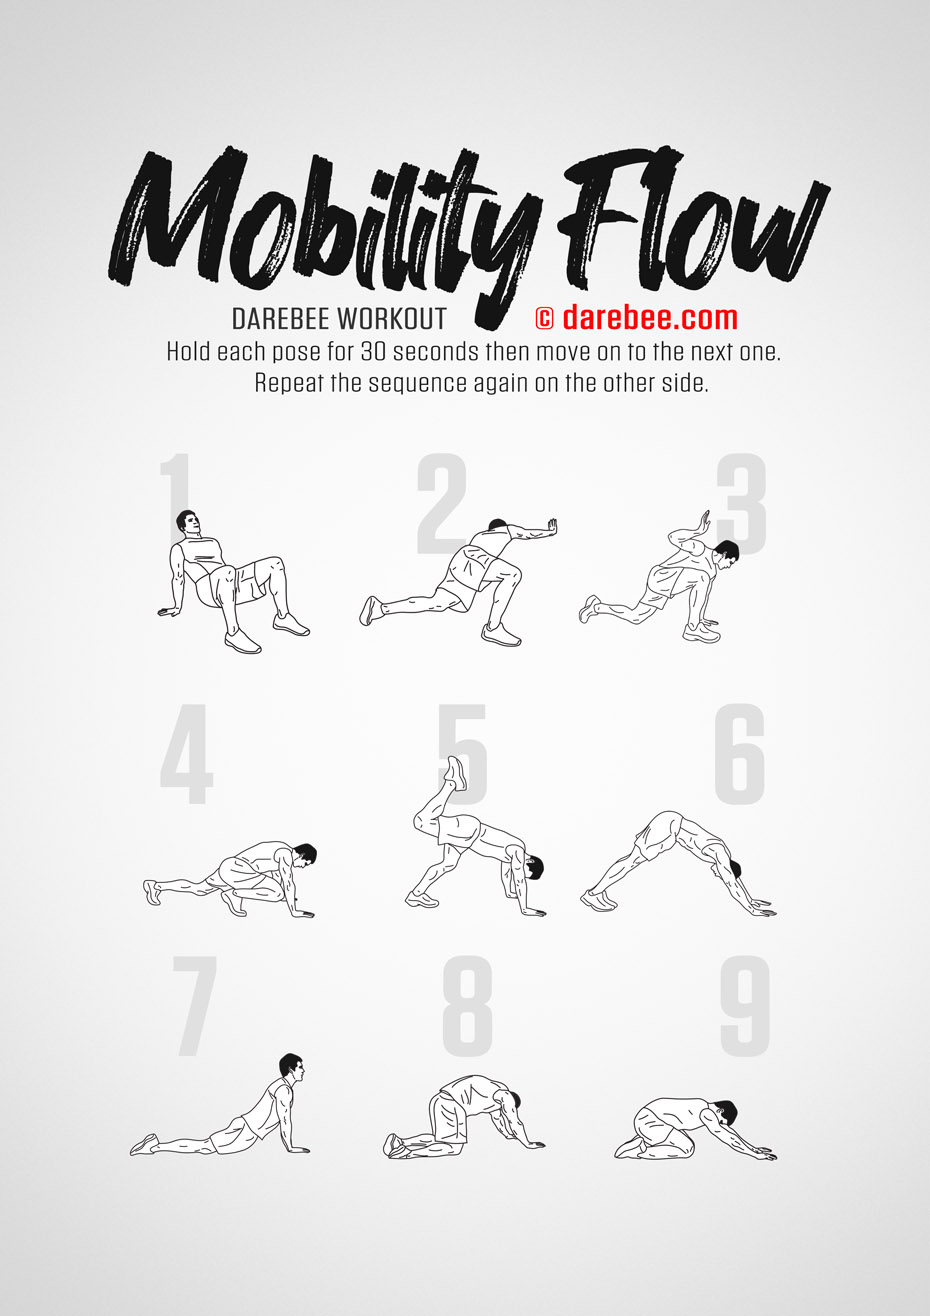 Darebees - Workout of the Day: Body Flow  #darebee  #wod #yoga #workout #stretching #fitness